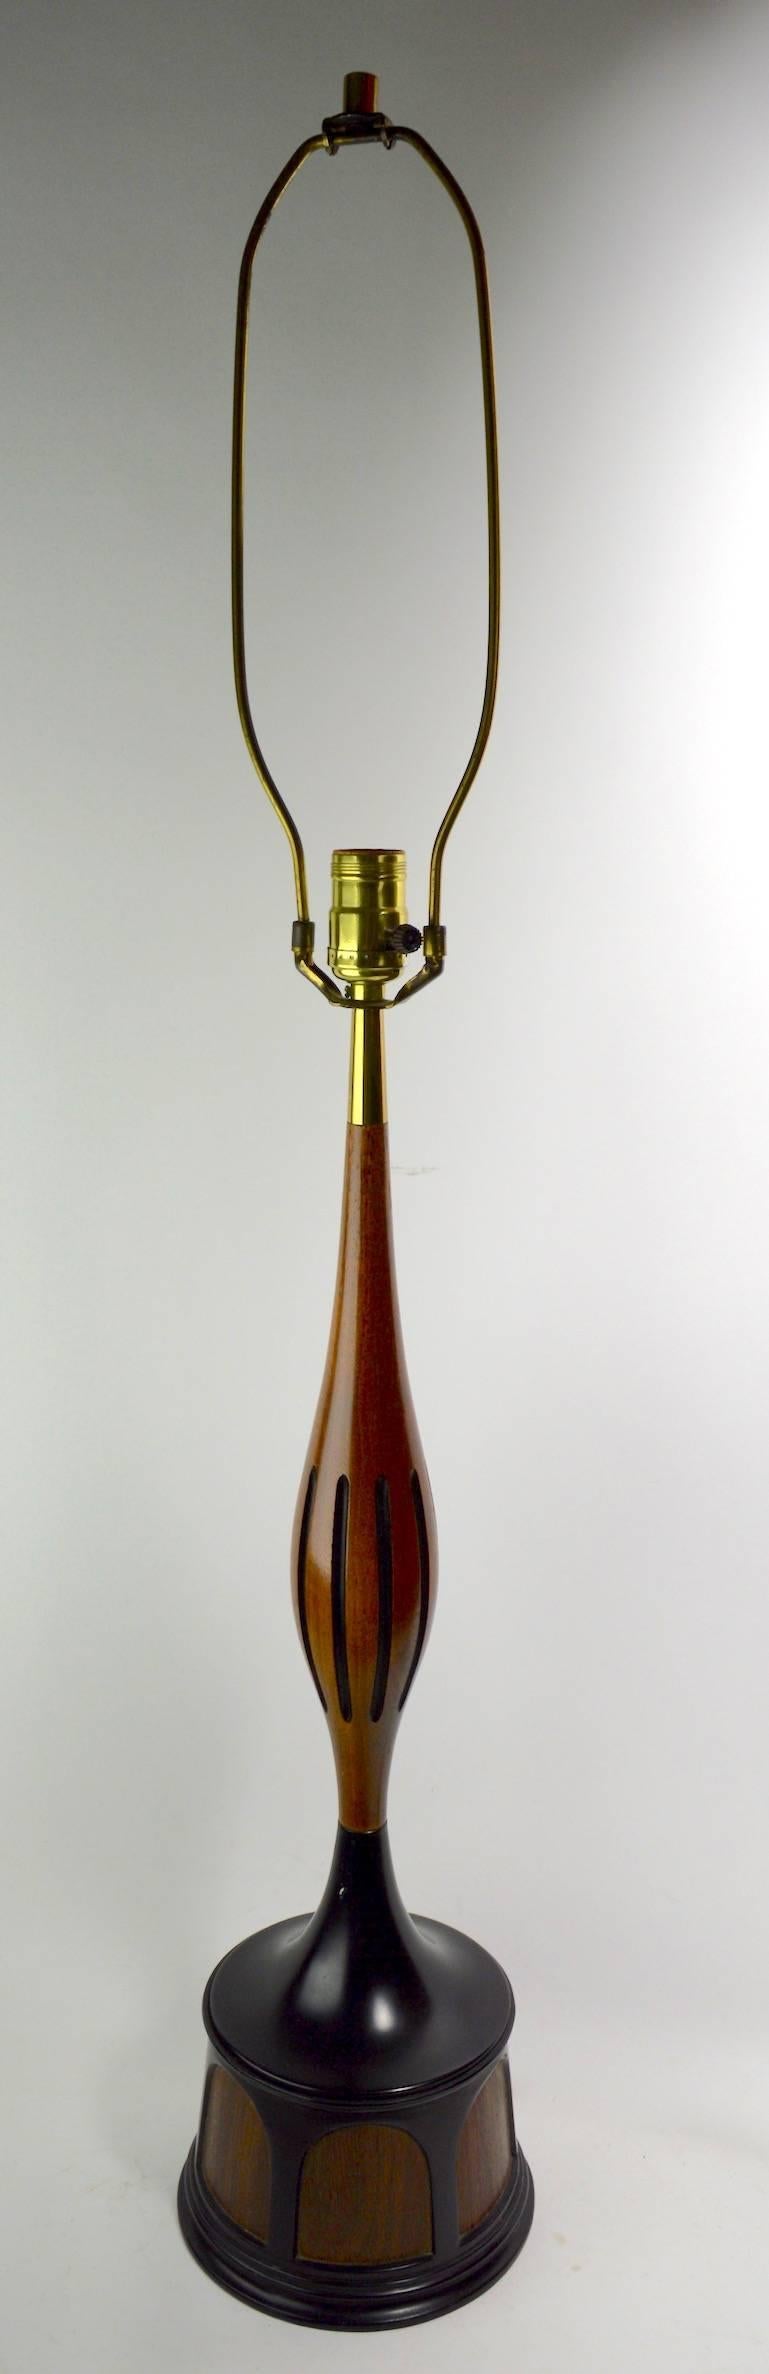 Table lamp attributed to Laurel with a solid wood teardrop form body on metal base with faux wood cathedral cut out base. Clean, working condition, shows very minor cosmetic wear, normal and consistent with age. Measure: Height to top of socket 26.5